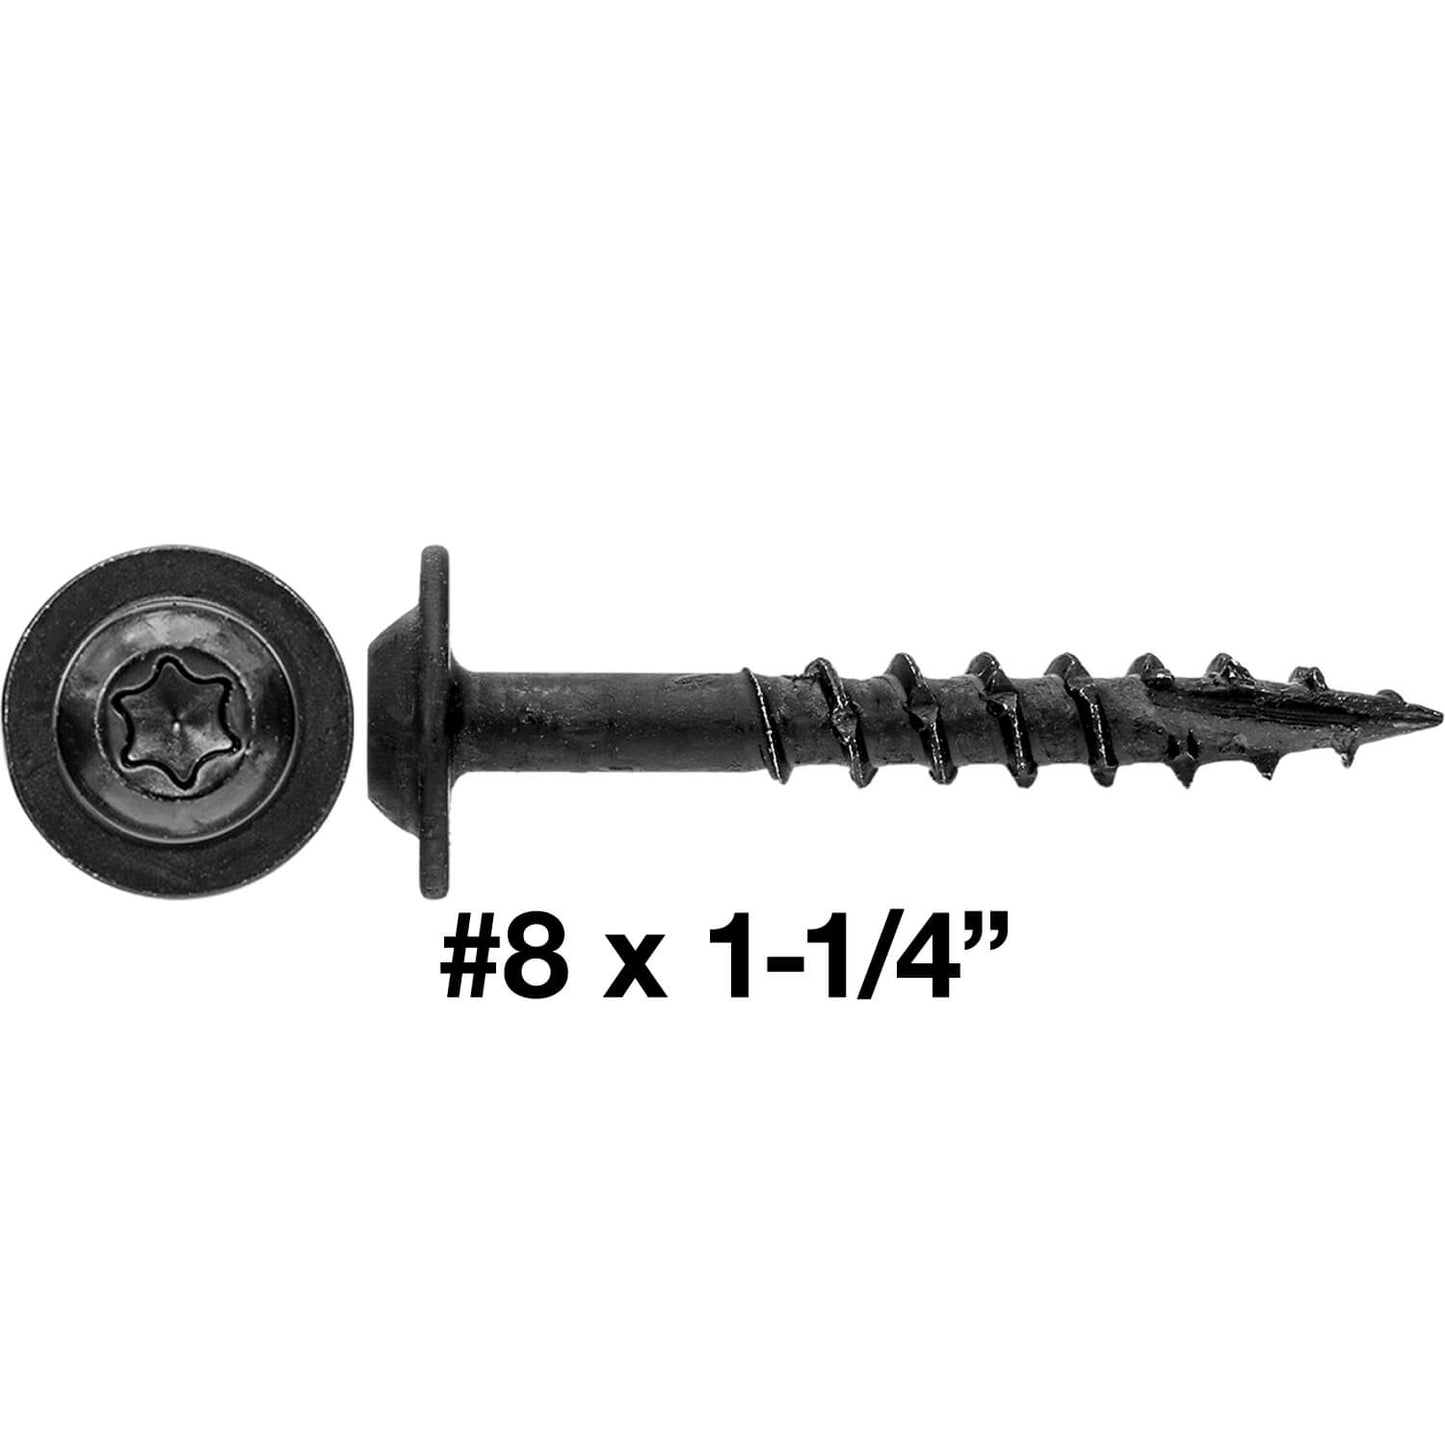 #8 Round Washer Head Truss Head Screw. Torx/Star Drive Head Wood Screws. Multipurpose Cabinet, Furniture, Siding and Trim and General Construction